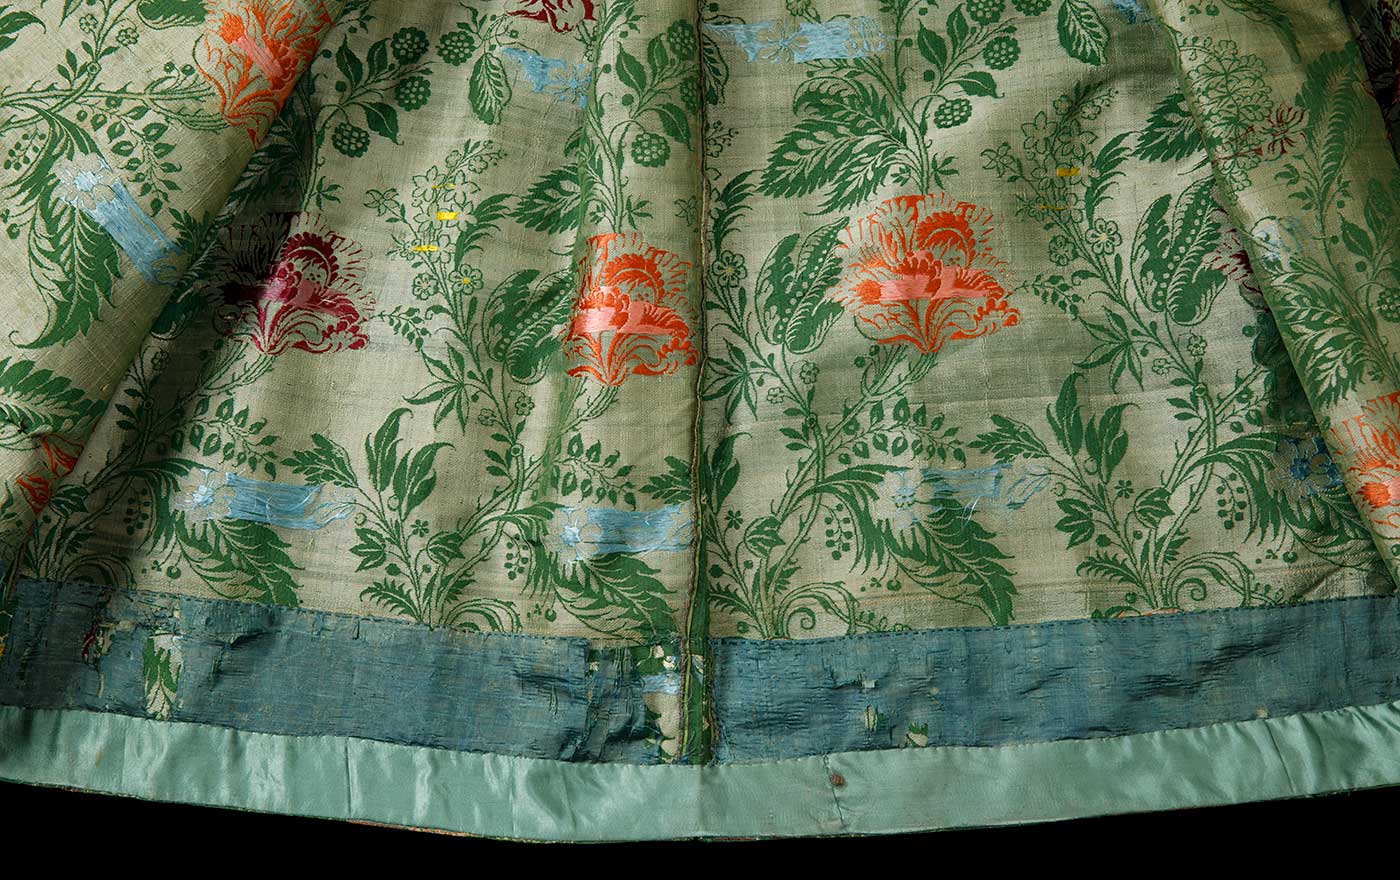 A detail image of the hem of a green and floral dress. - click to view larger image